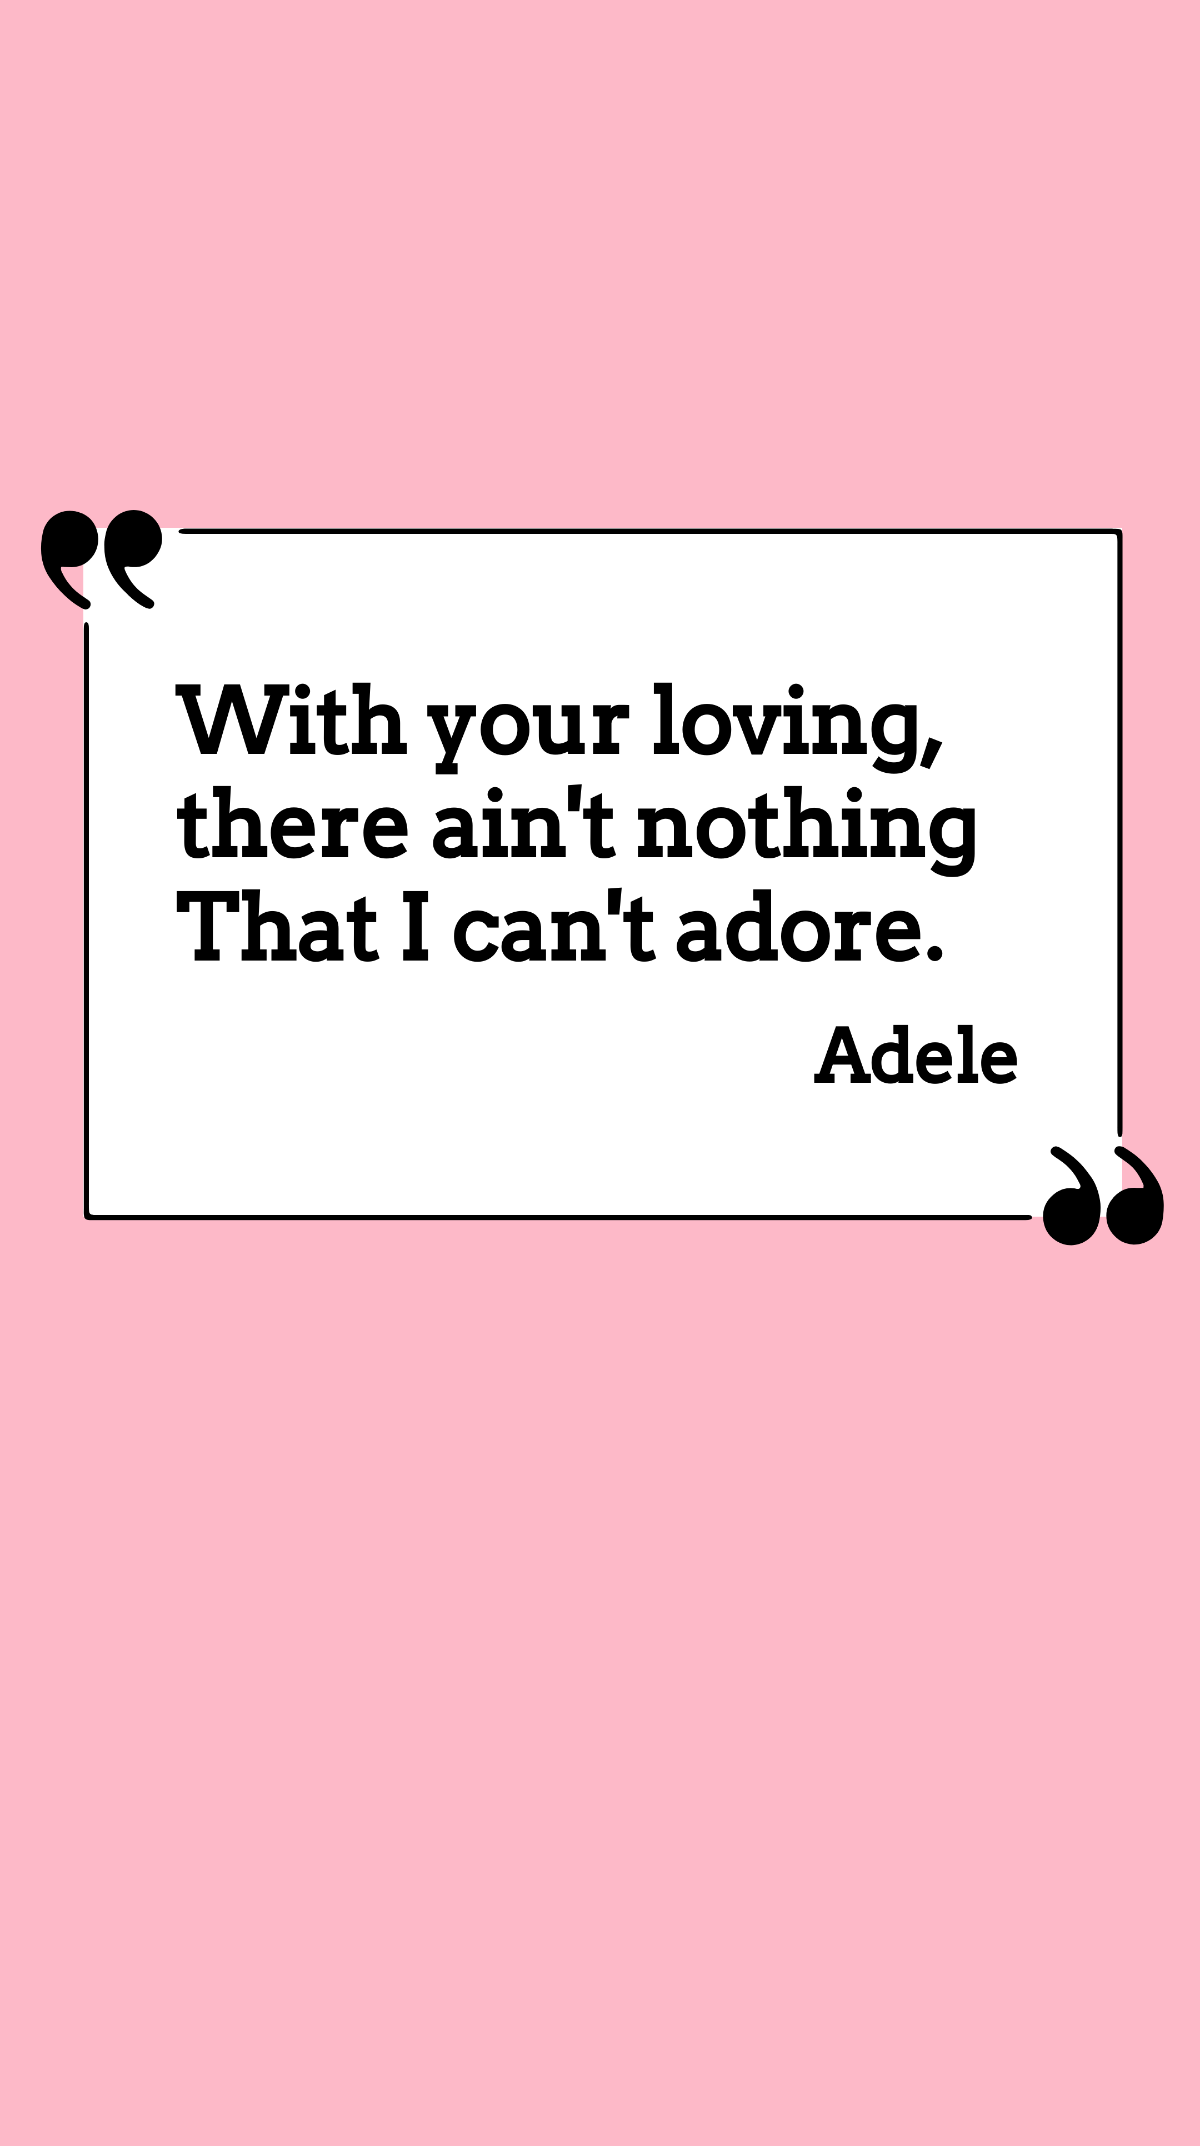 Adele - With your loving, there ain't nothing that I can't adore. Template